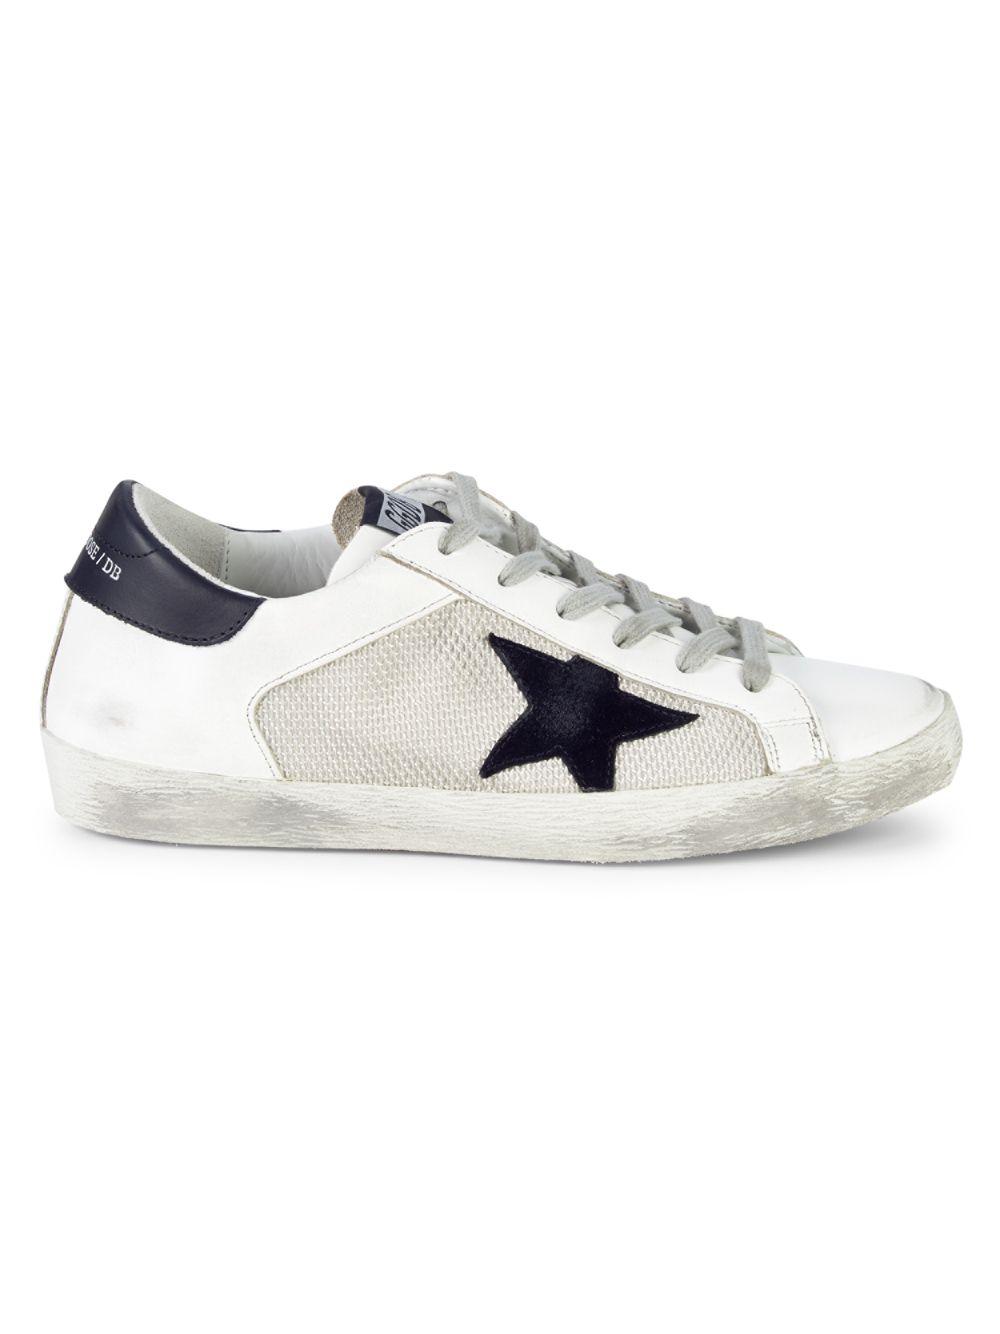 Goose Superstar Mixed Media Sneakers in White - Lyst